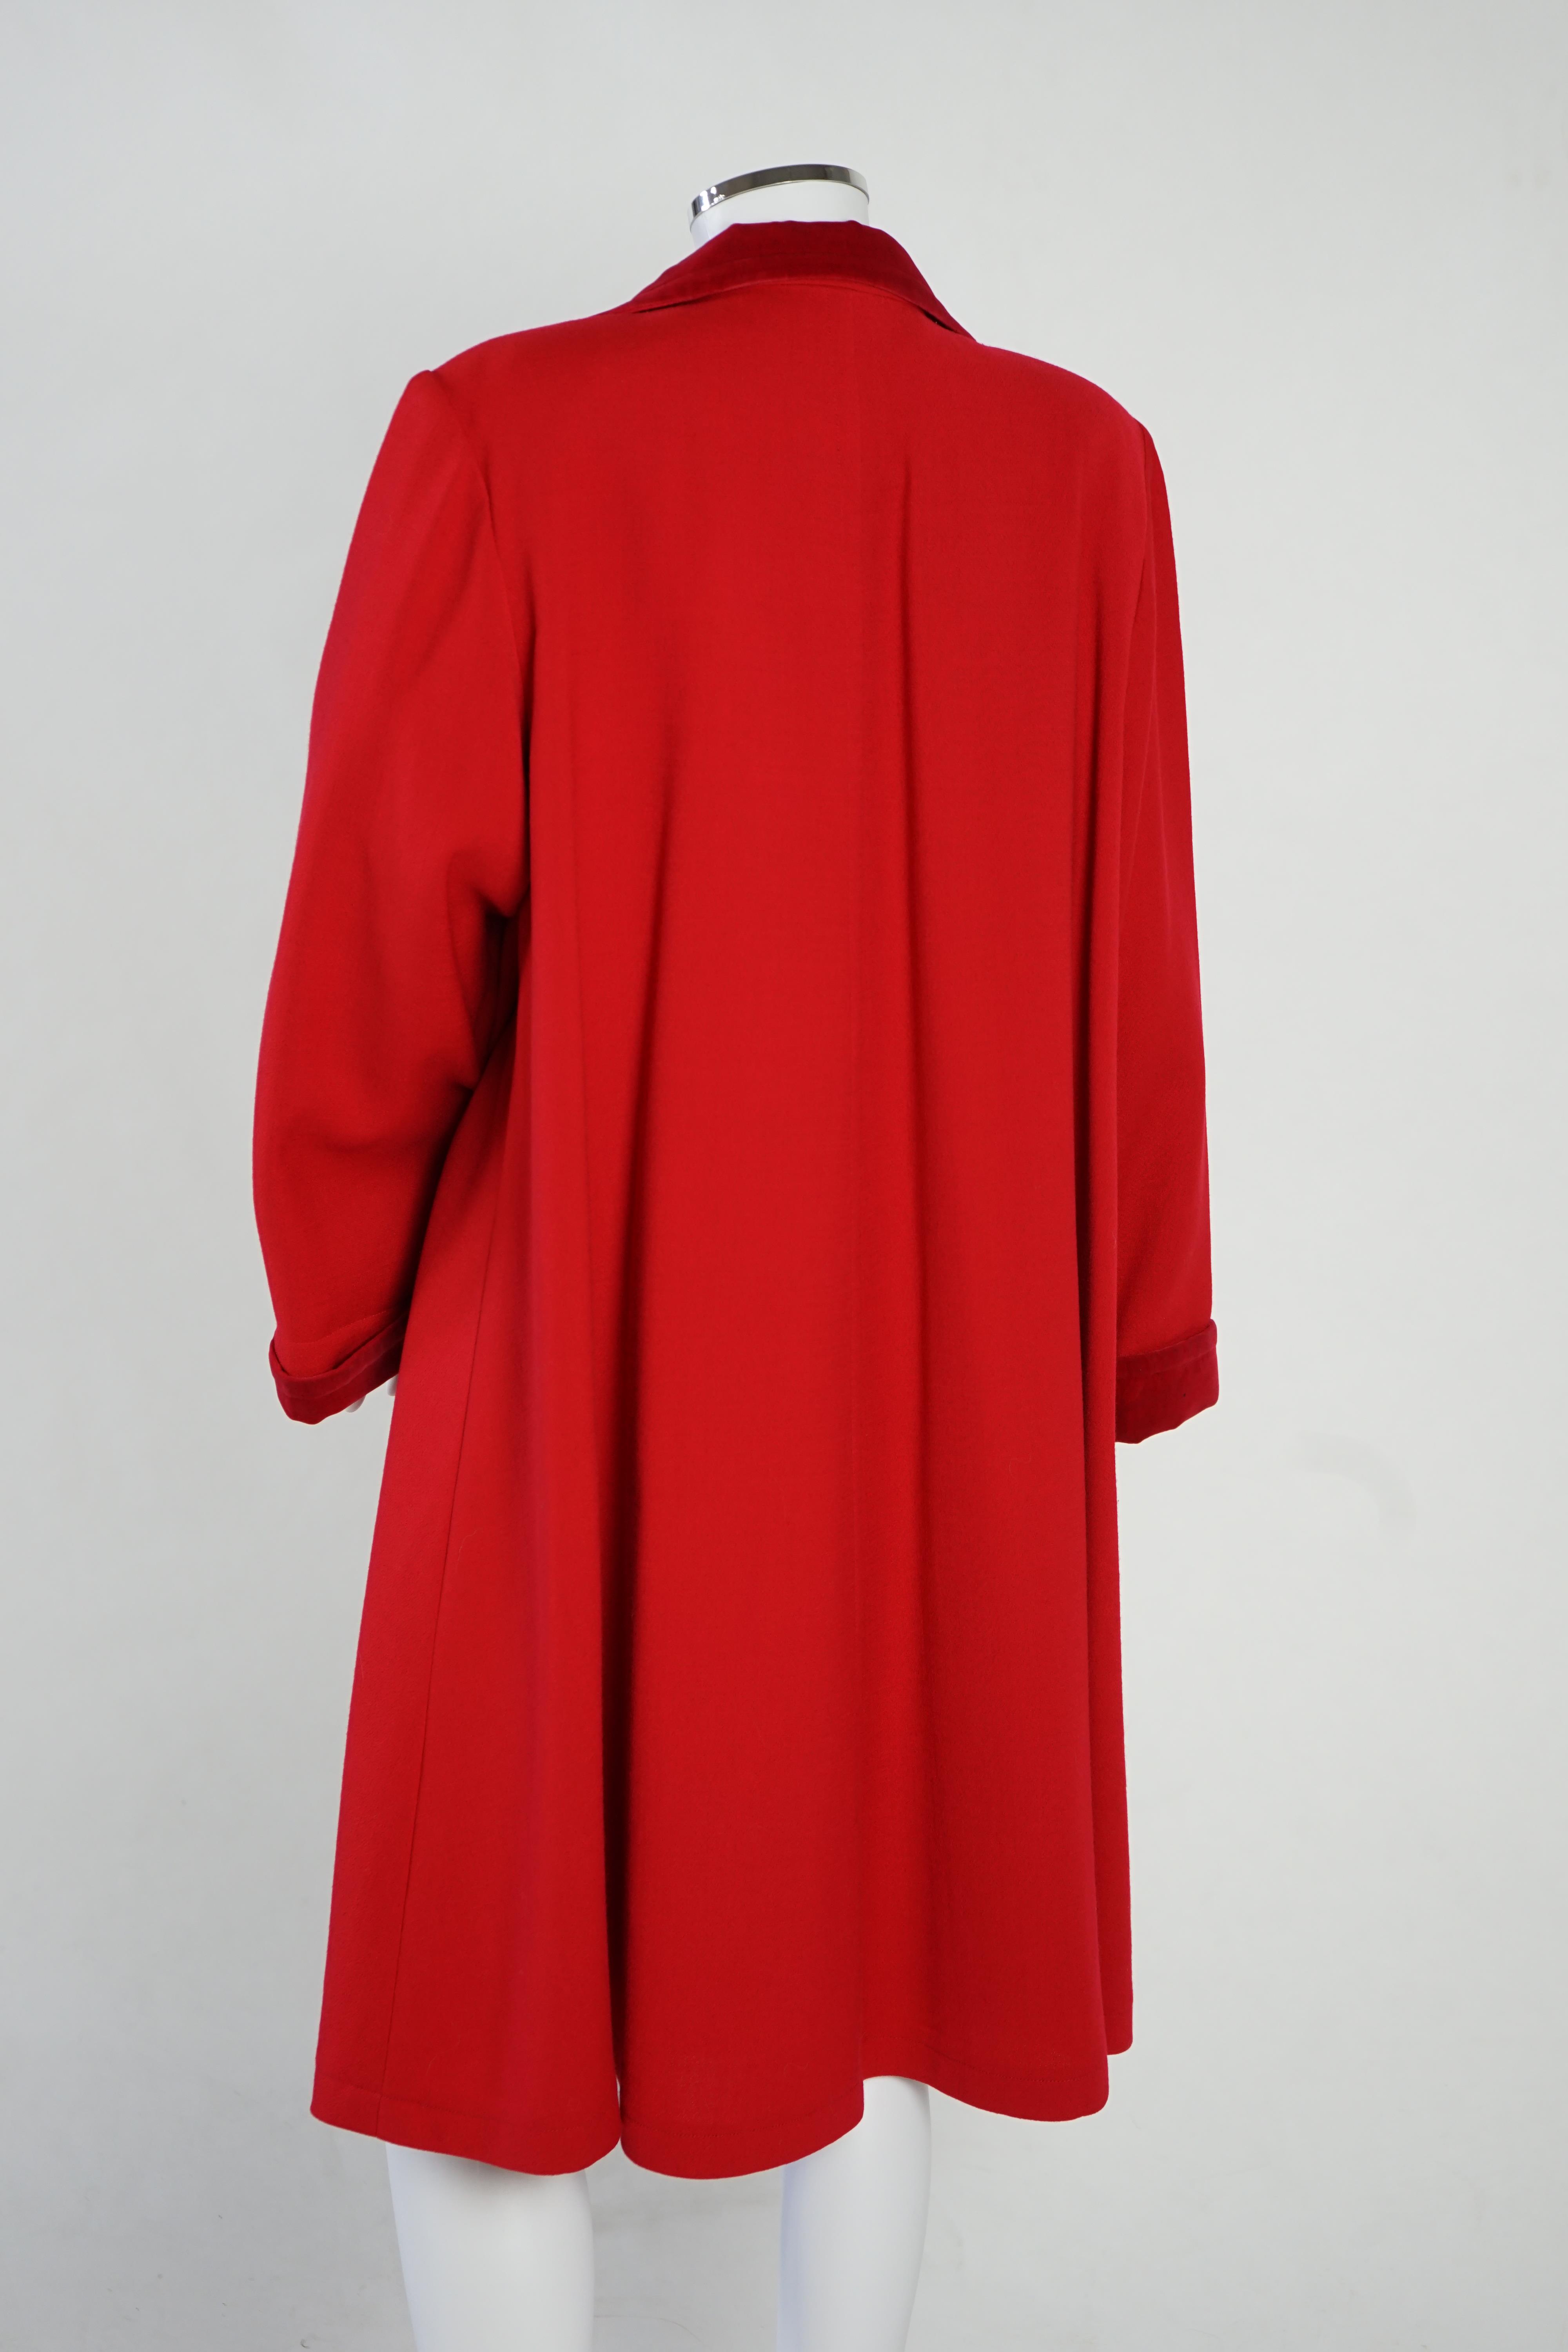 A vintage Yves Saint Laurent variation lady's red wool coat with velvet trim, F 40 (UK 12). Proceeds to Happy Paws Puppy Rescue